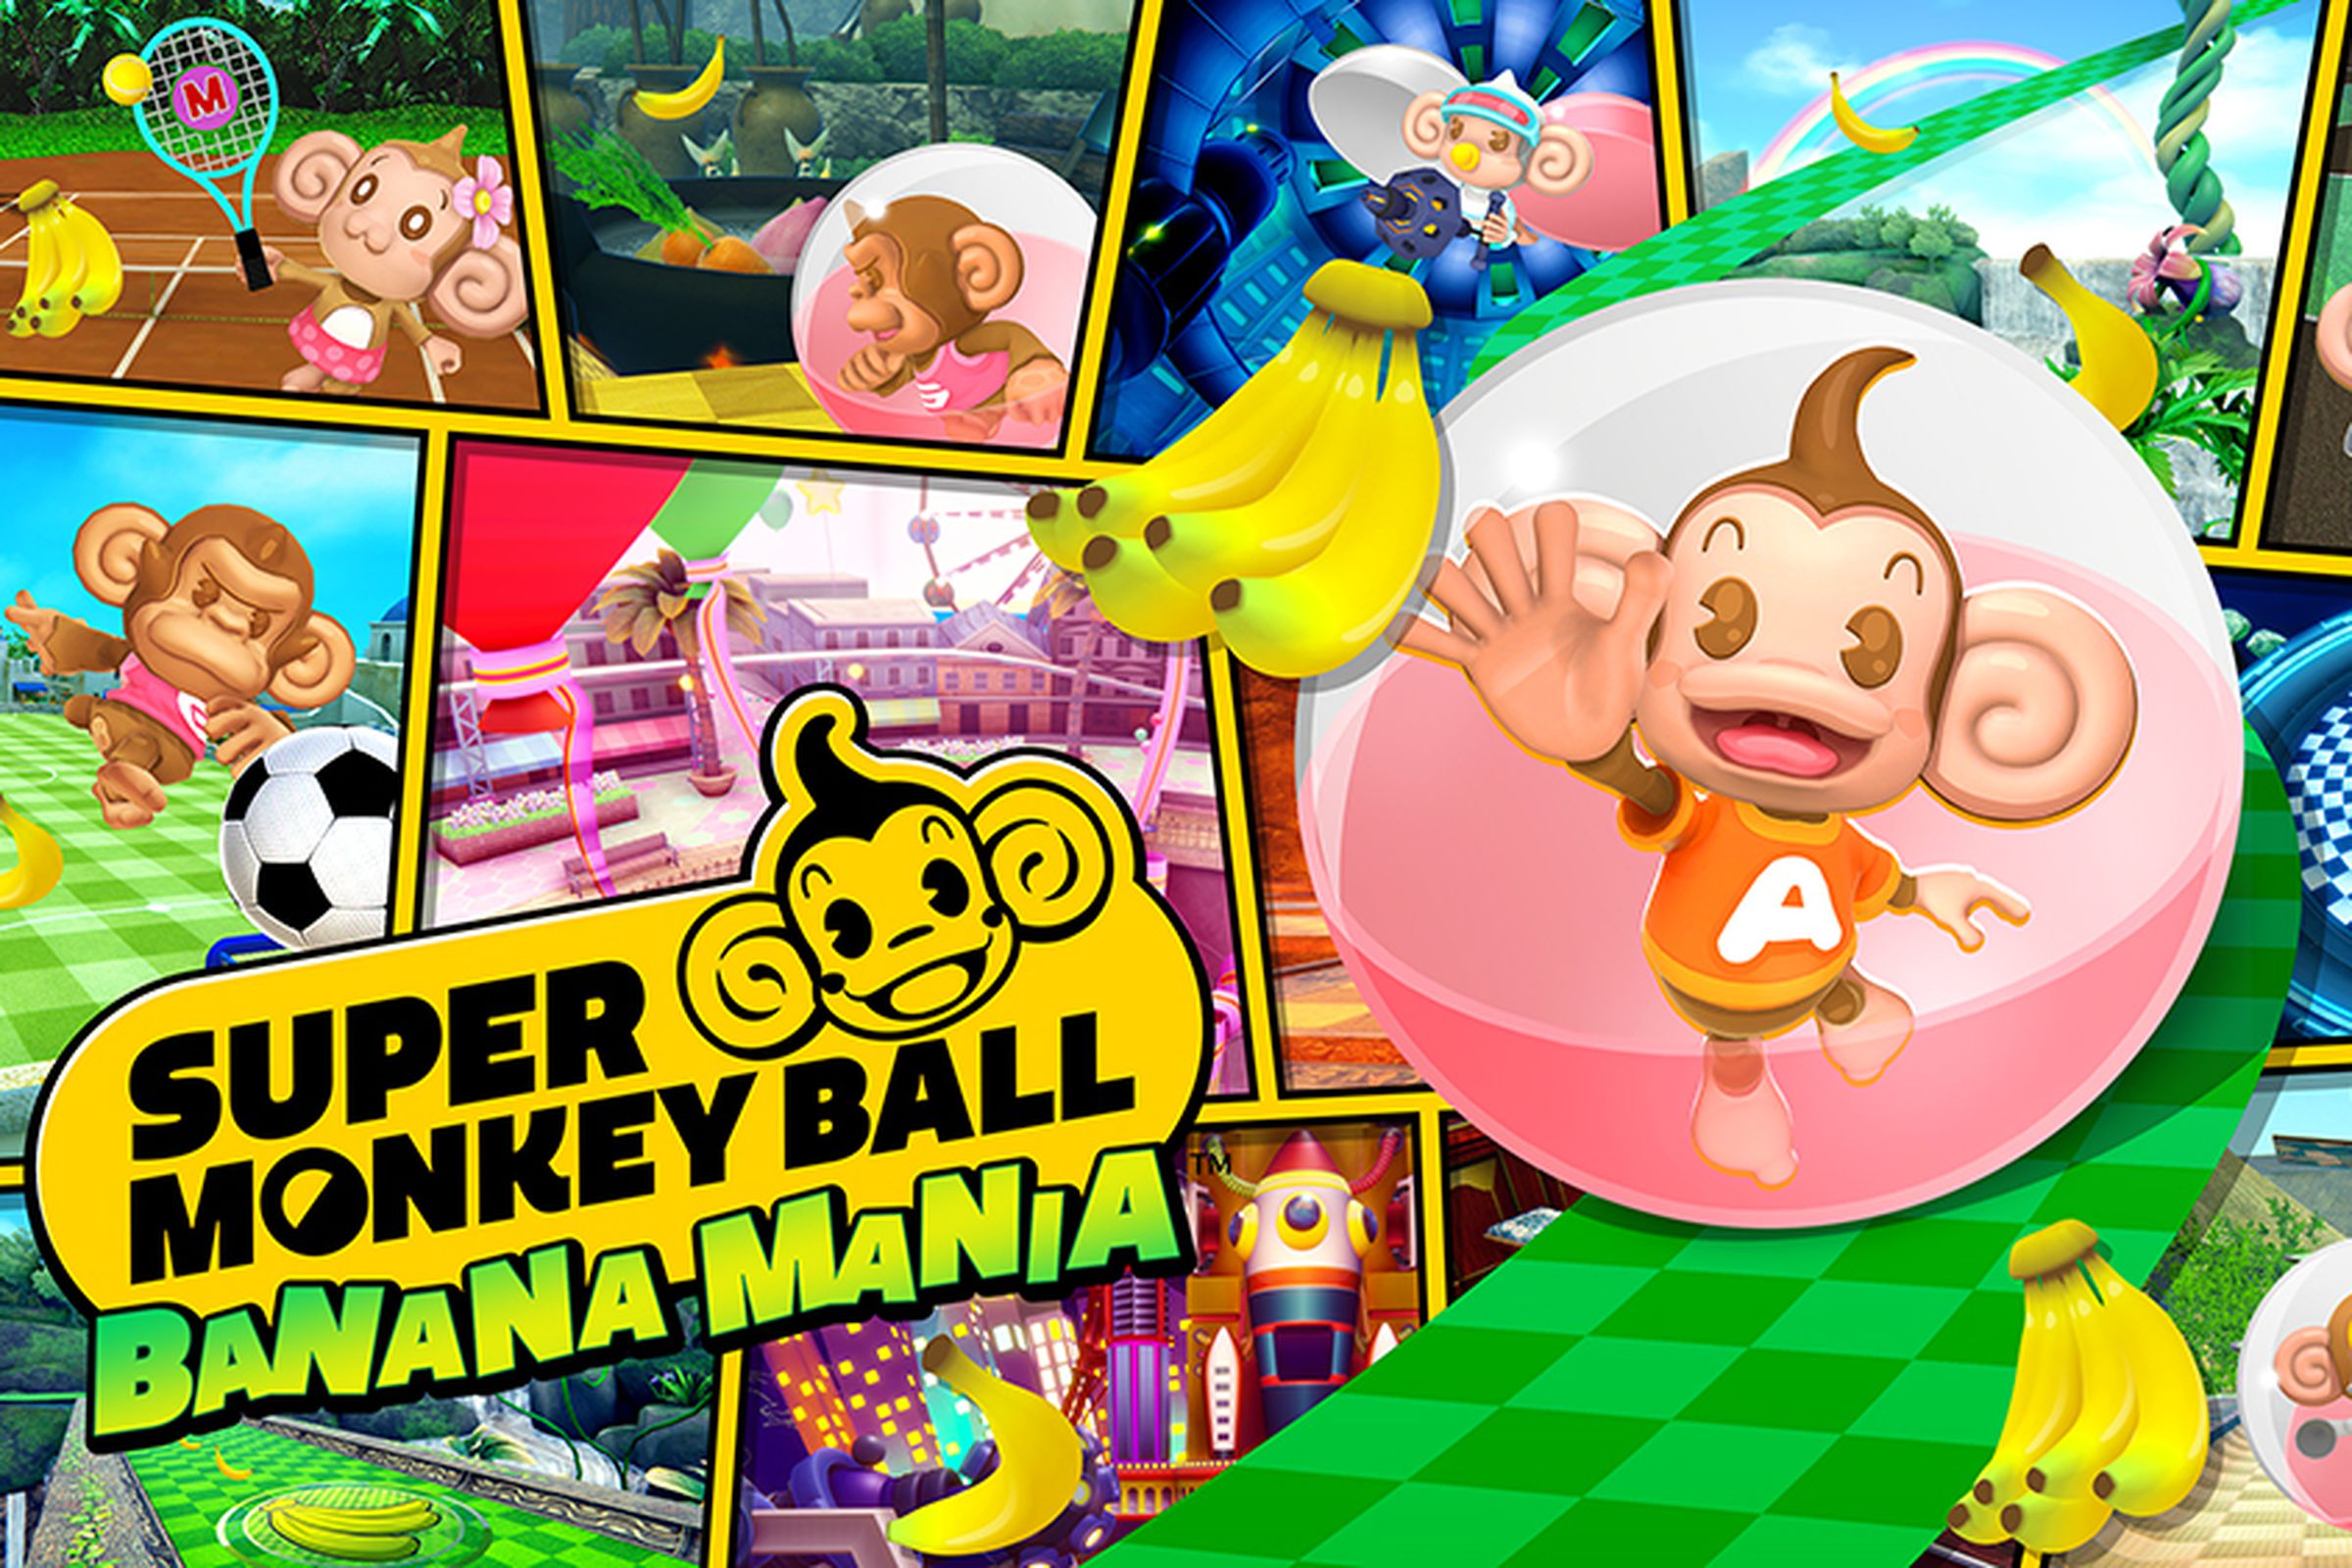 A collage of images from Super Monkey Ball Banana Mania.